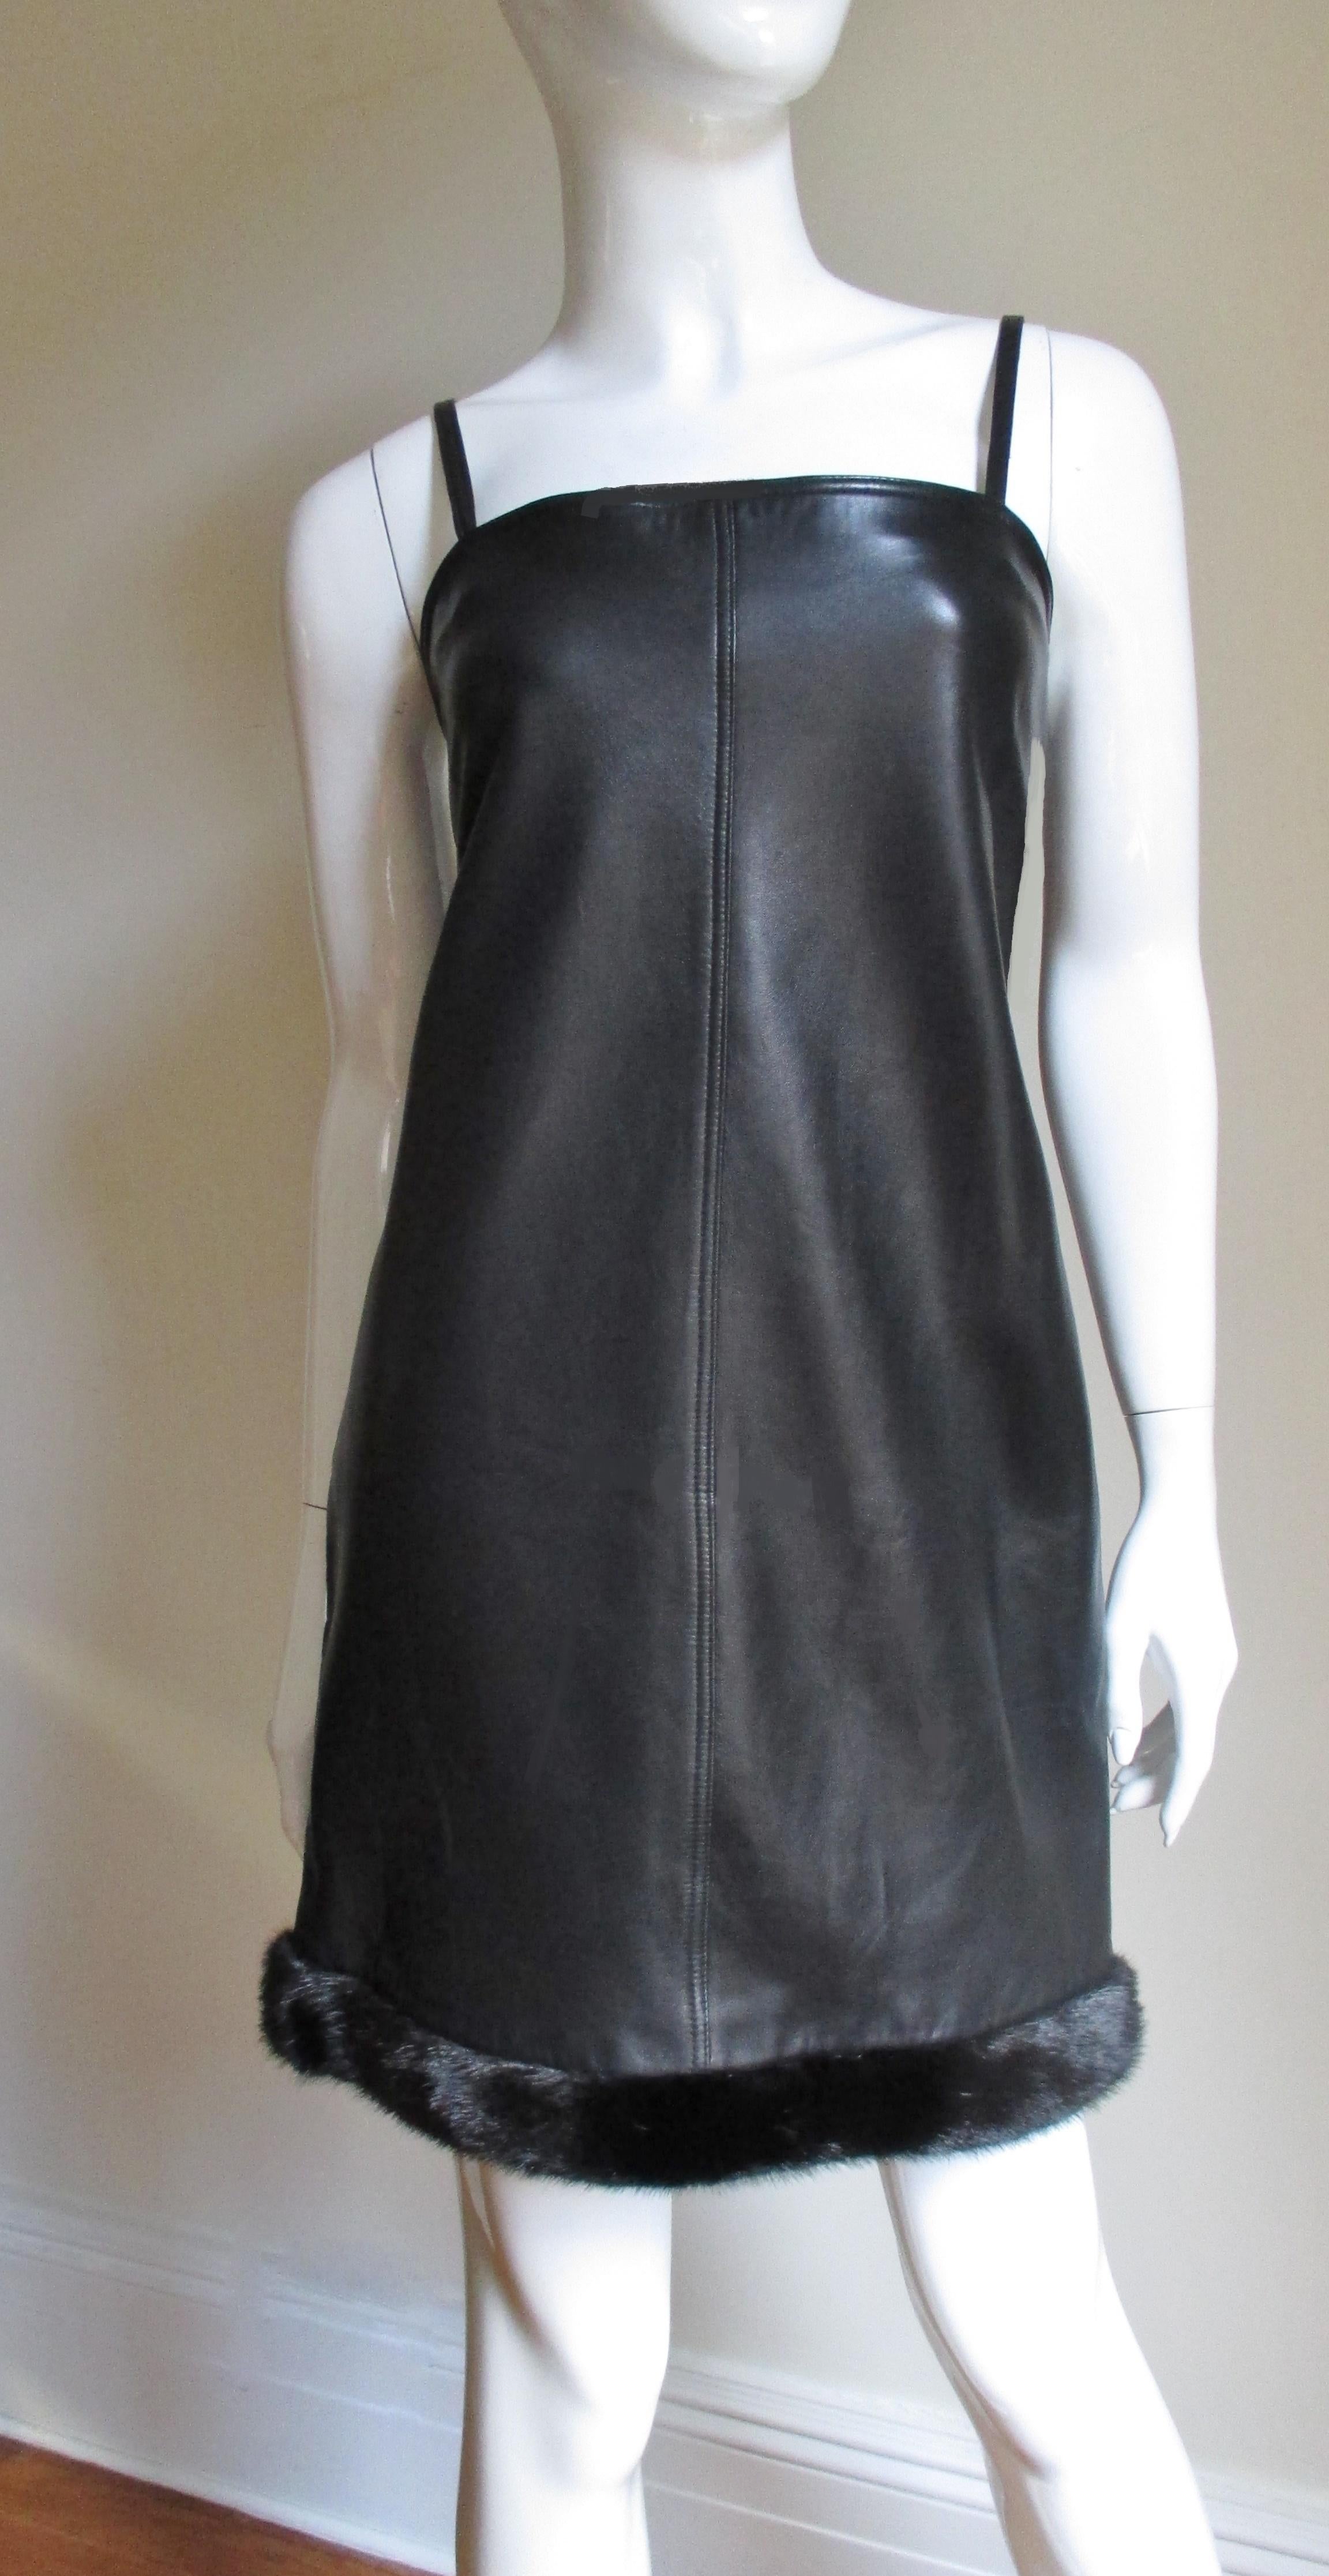 A soft, supple black leather dress with 2